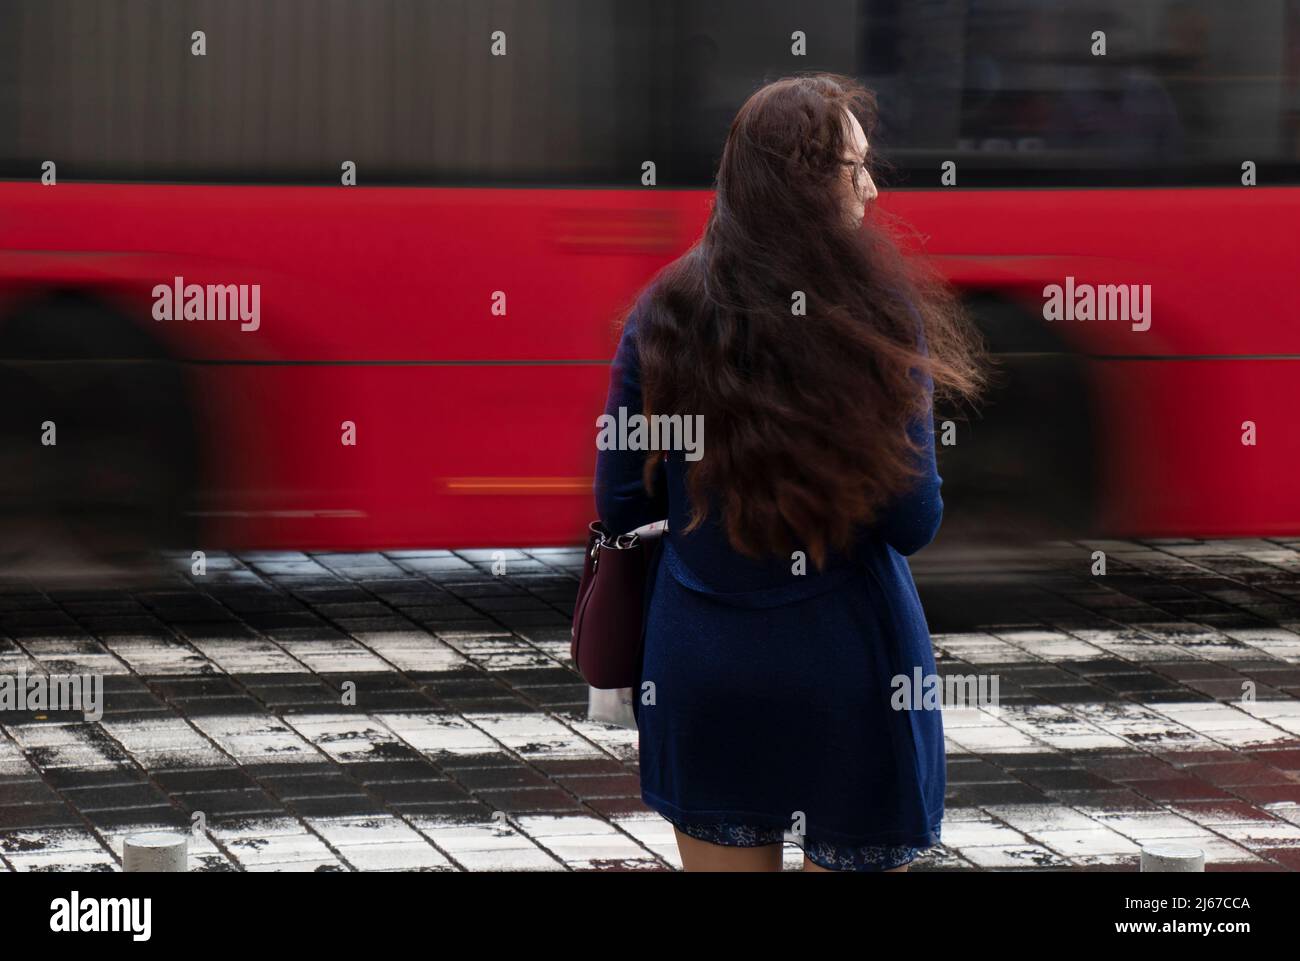 Belgrade, Serbia - April 27, 2022: Young woman with long wavy hair waiting on a crossroad on a rainy day with traffic in motion blur, rear view Stock Photo